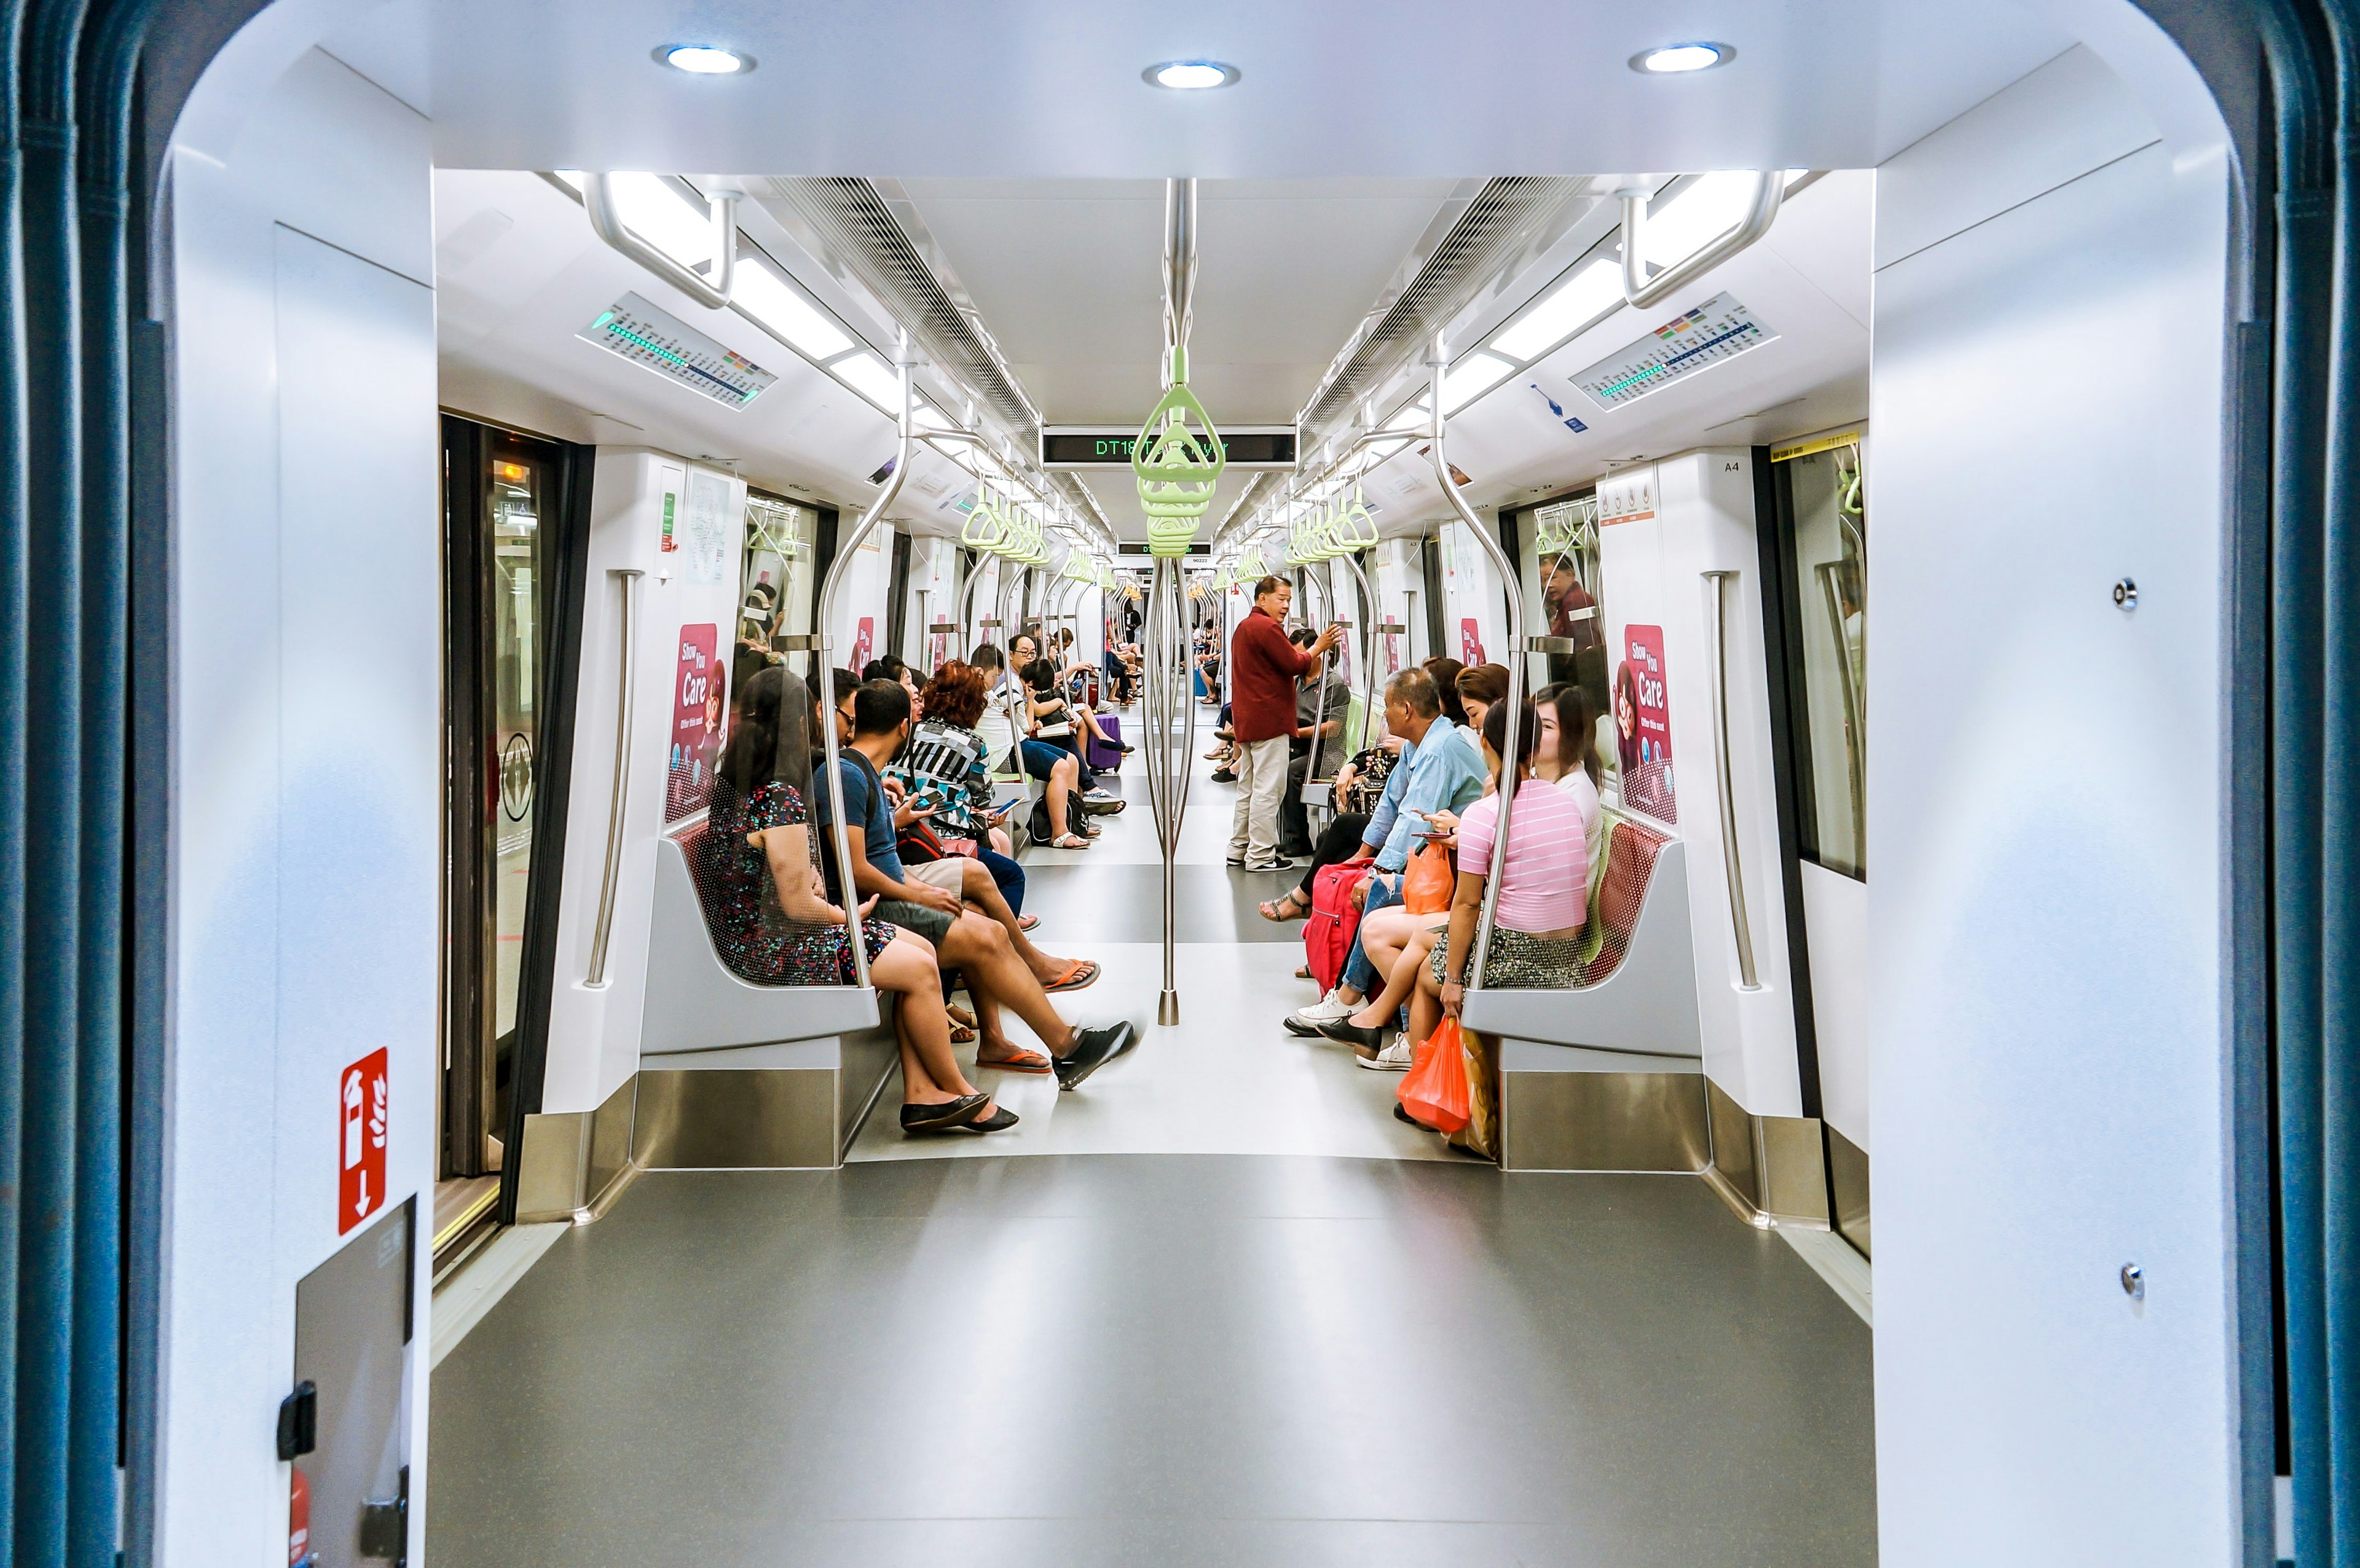 a photo from inside singapore's subway system, with people sitting on benches in a clean white car